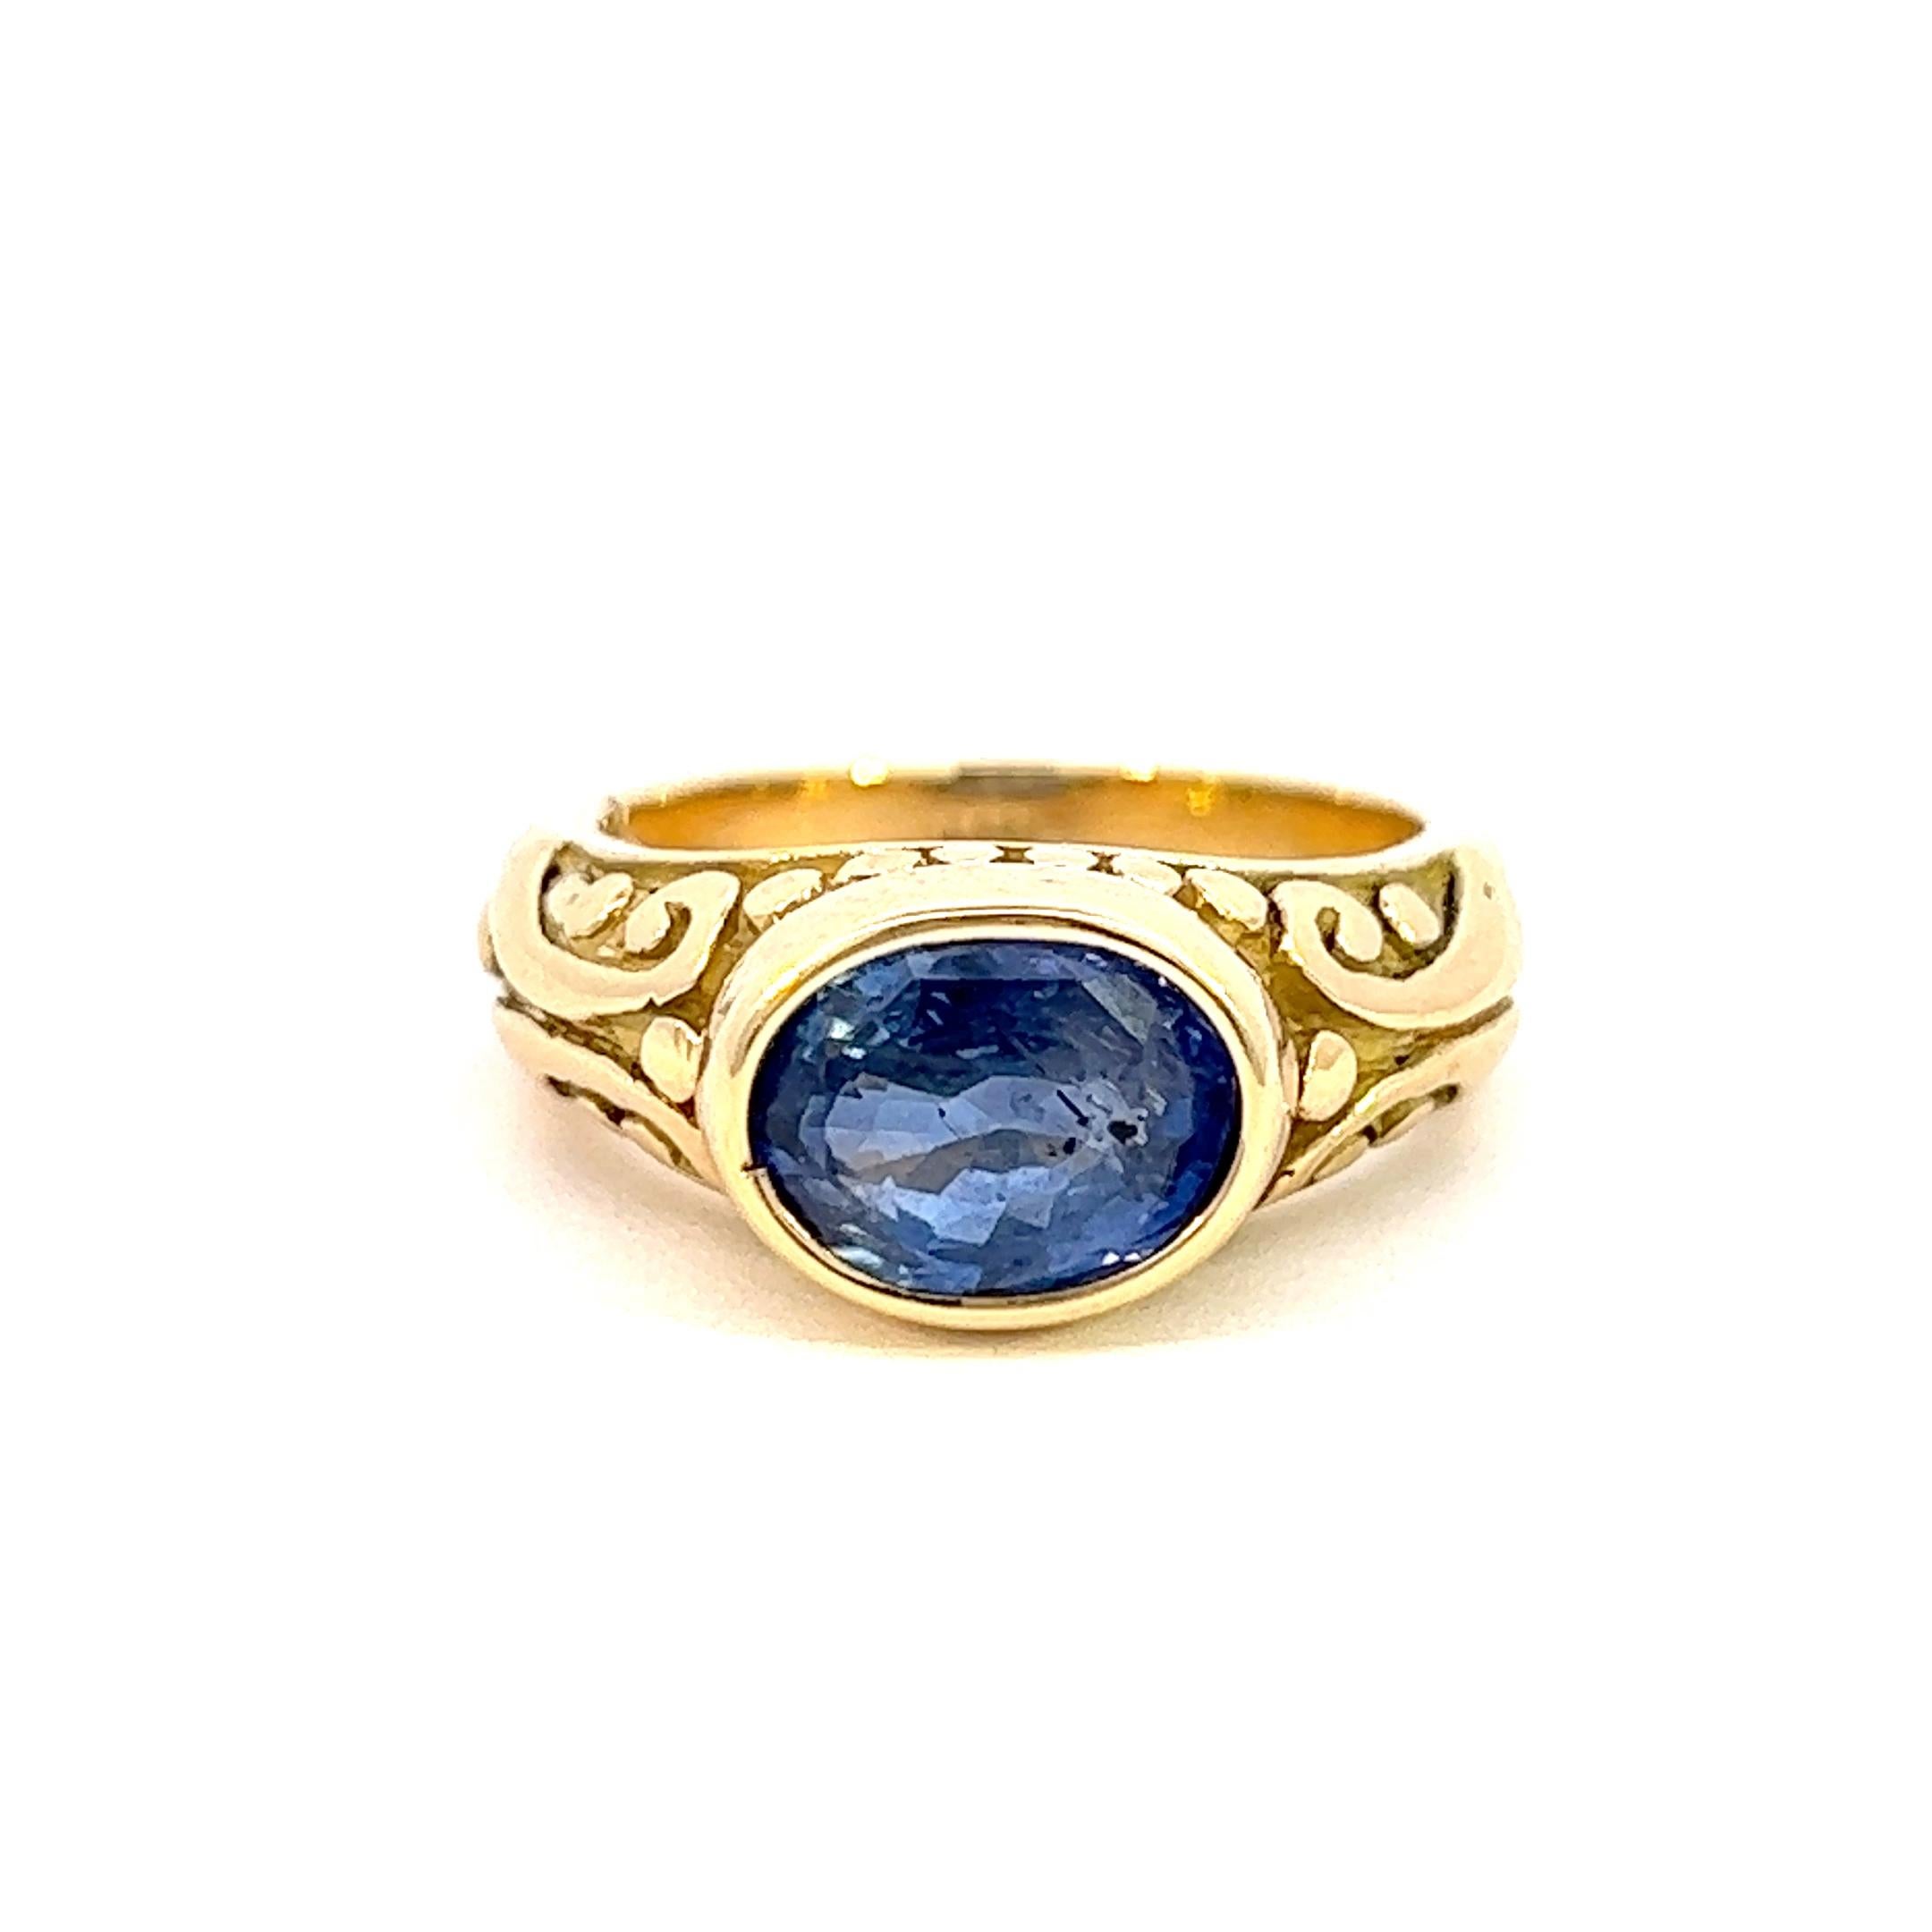 This exquisite 18k gold ring found in a scrap bin in NYC, was paired with a stunning blue sapphire from Jaipur, India. Truly a one of a kind piece, that is both modern and traditional in aesthetic.